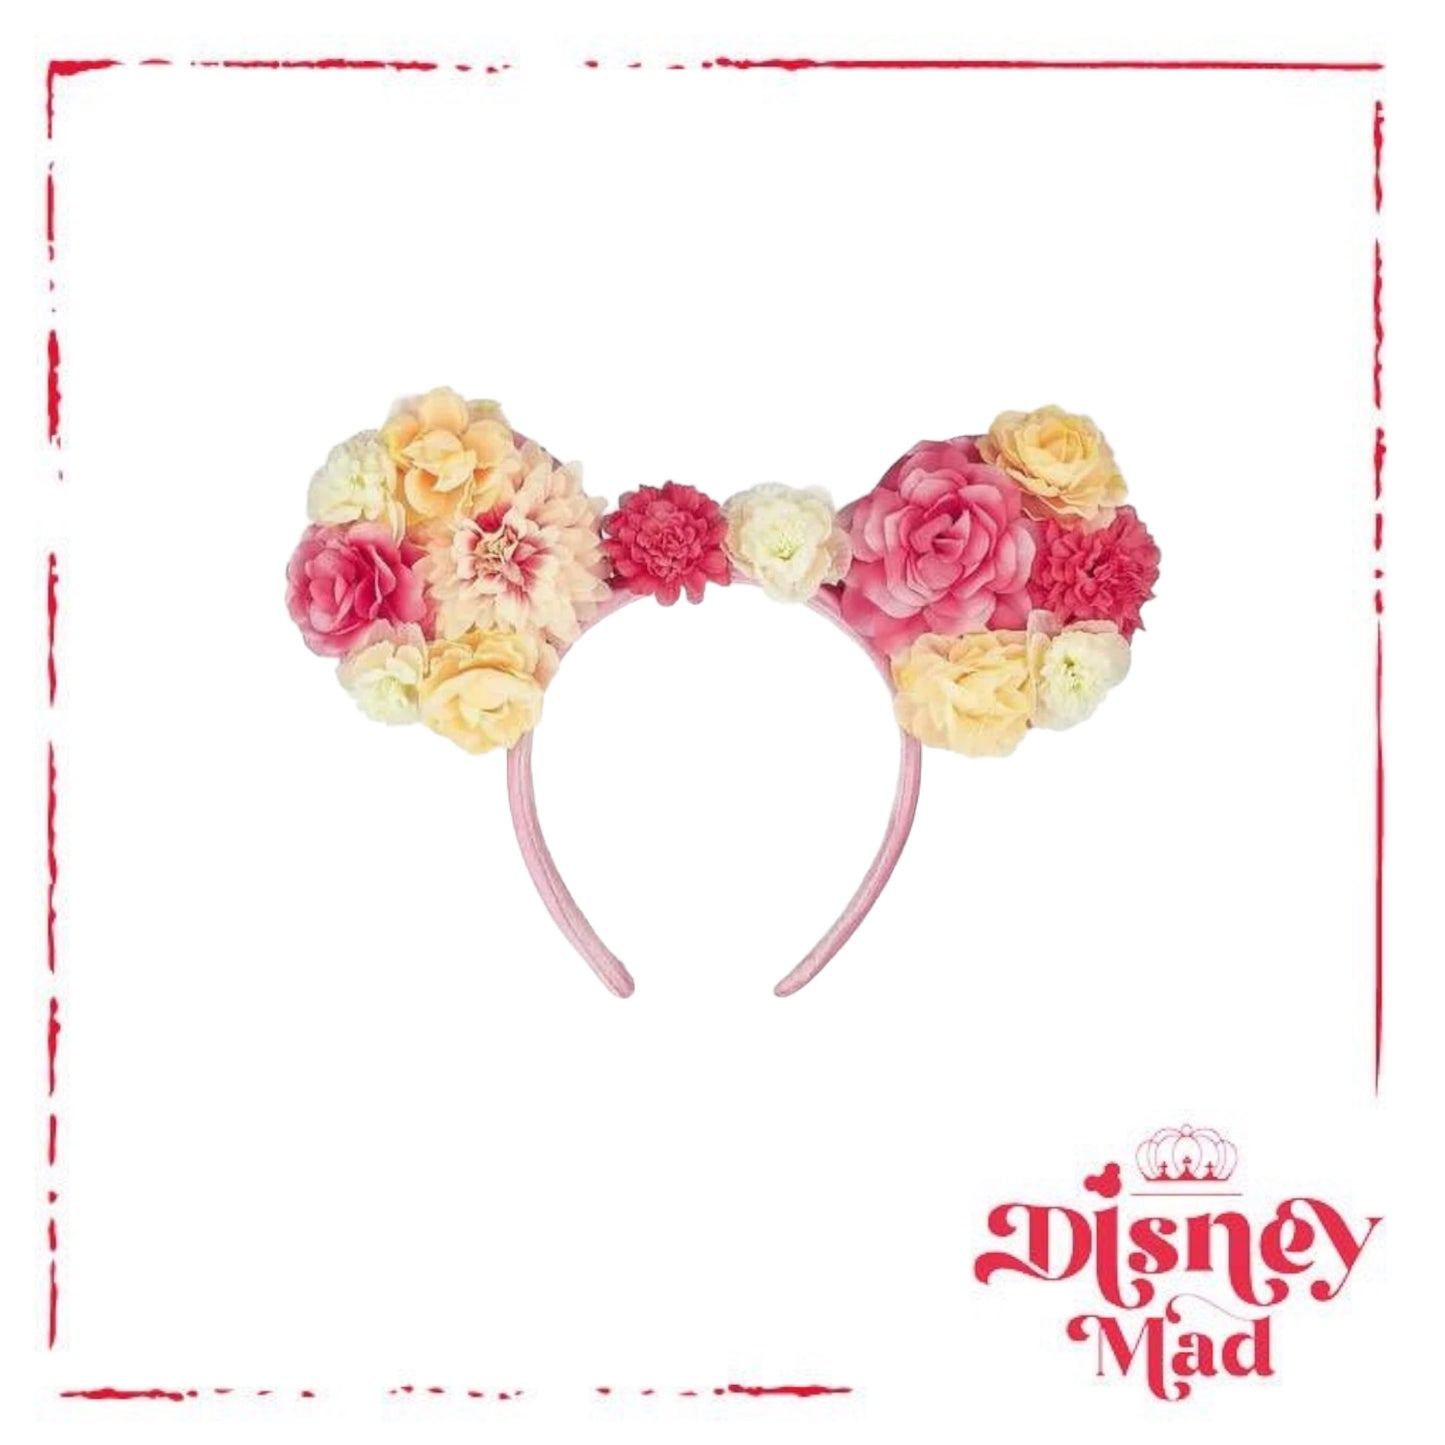 Disney's Minnie Mouse Ears Multi Colour Pink Floral Crown Headband